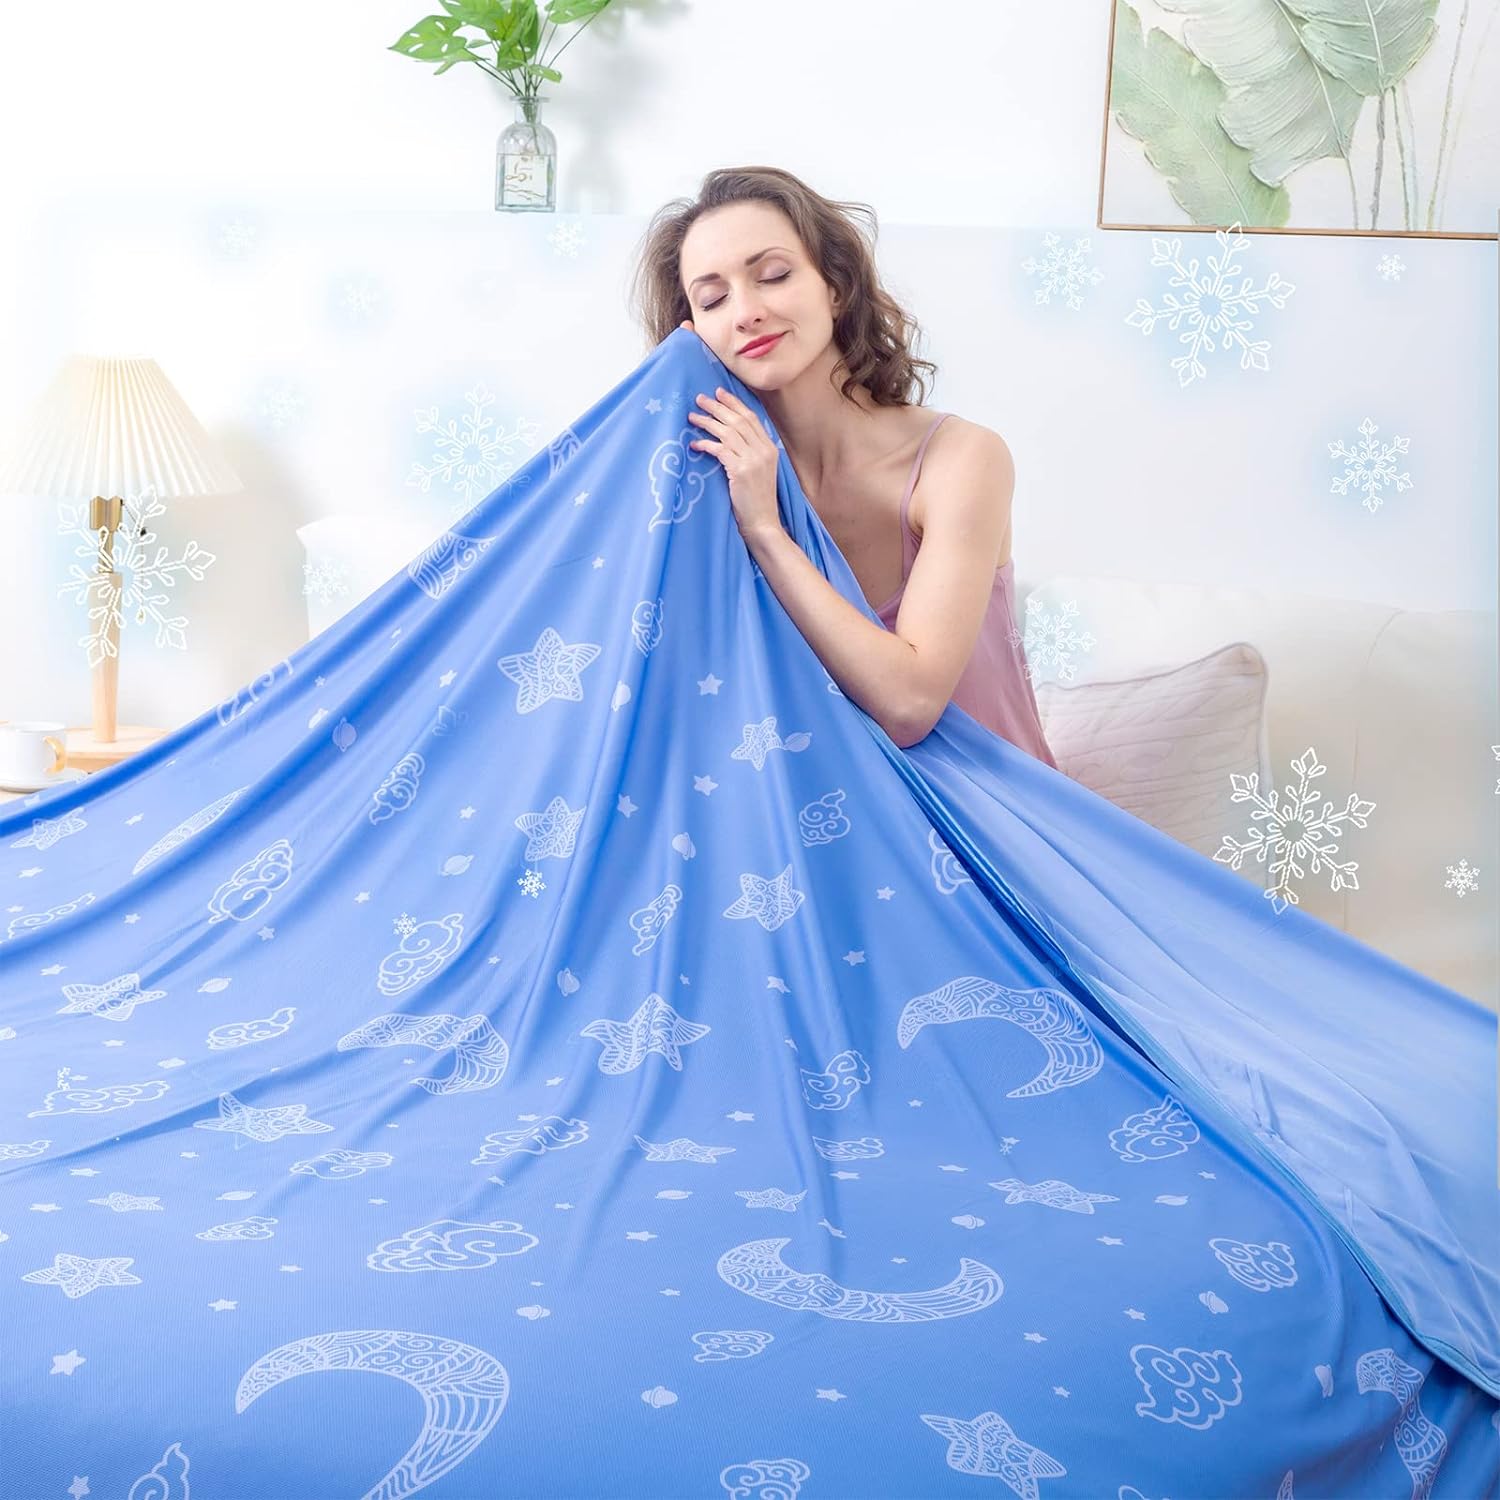 Cooling Bed Blanket (90x90 Queen Size) for Hot Sleepers, Arc-Chill Q-Max >0.5 Cool Fiber,100% Oeko-Tex Certified Lightweight Summer Cool Blanket for Travel/Outdoor Ultra Cold Breathable, Blue